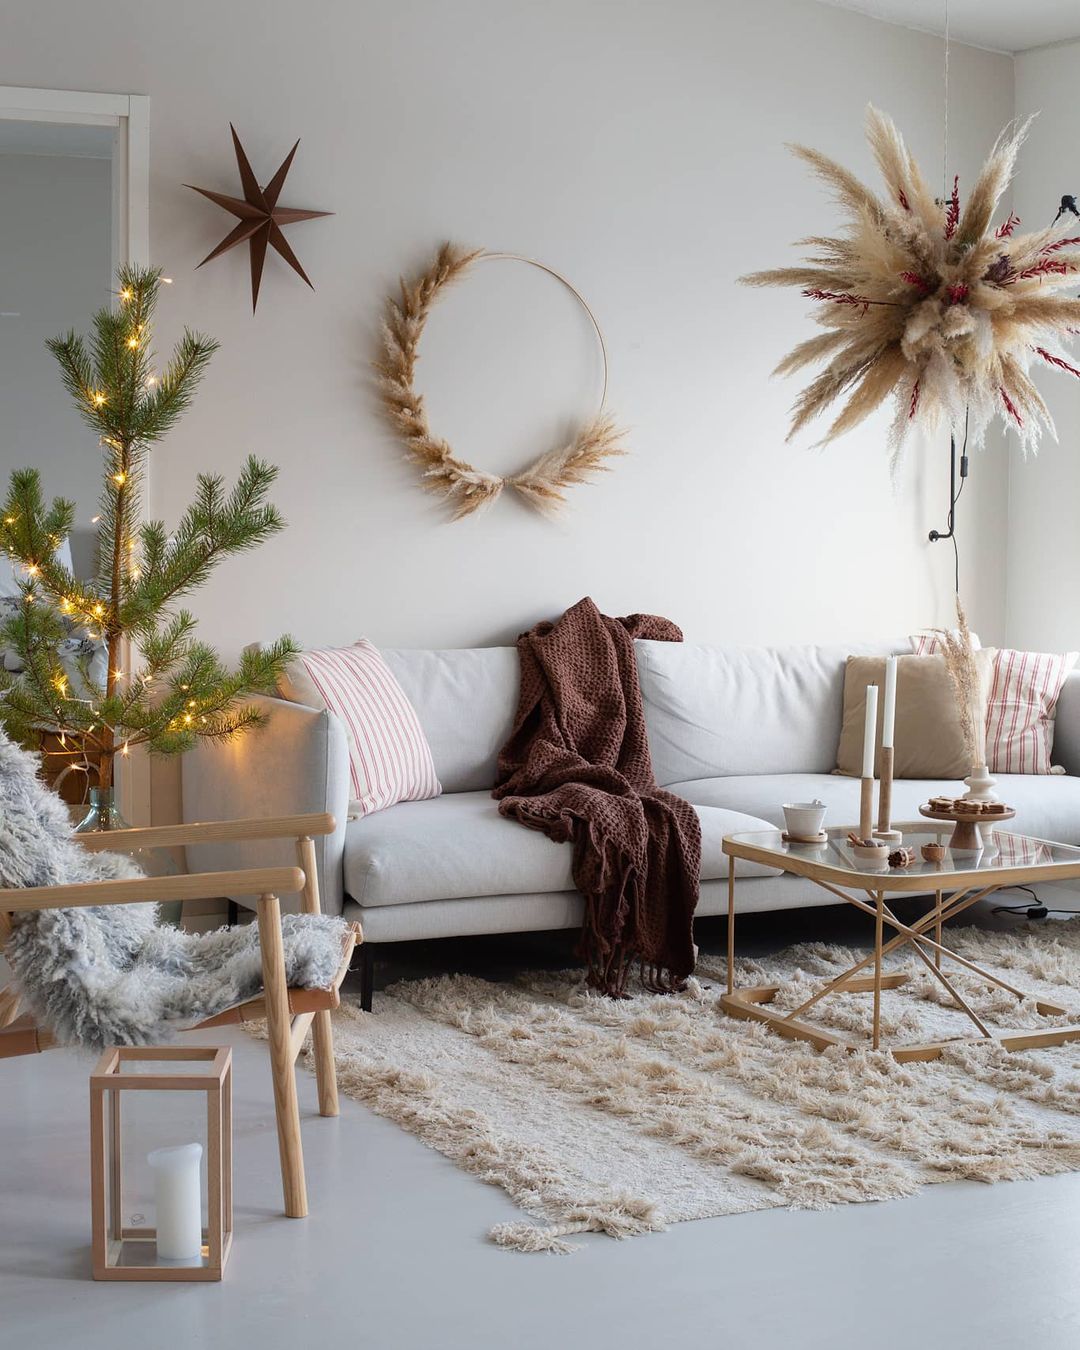 A Christmassy living room with decorations and soft furnishings  